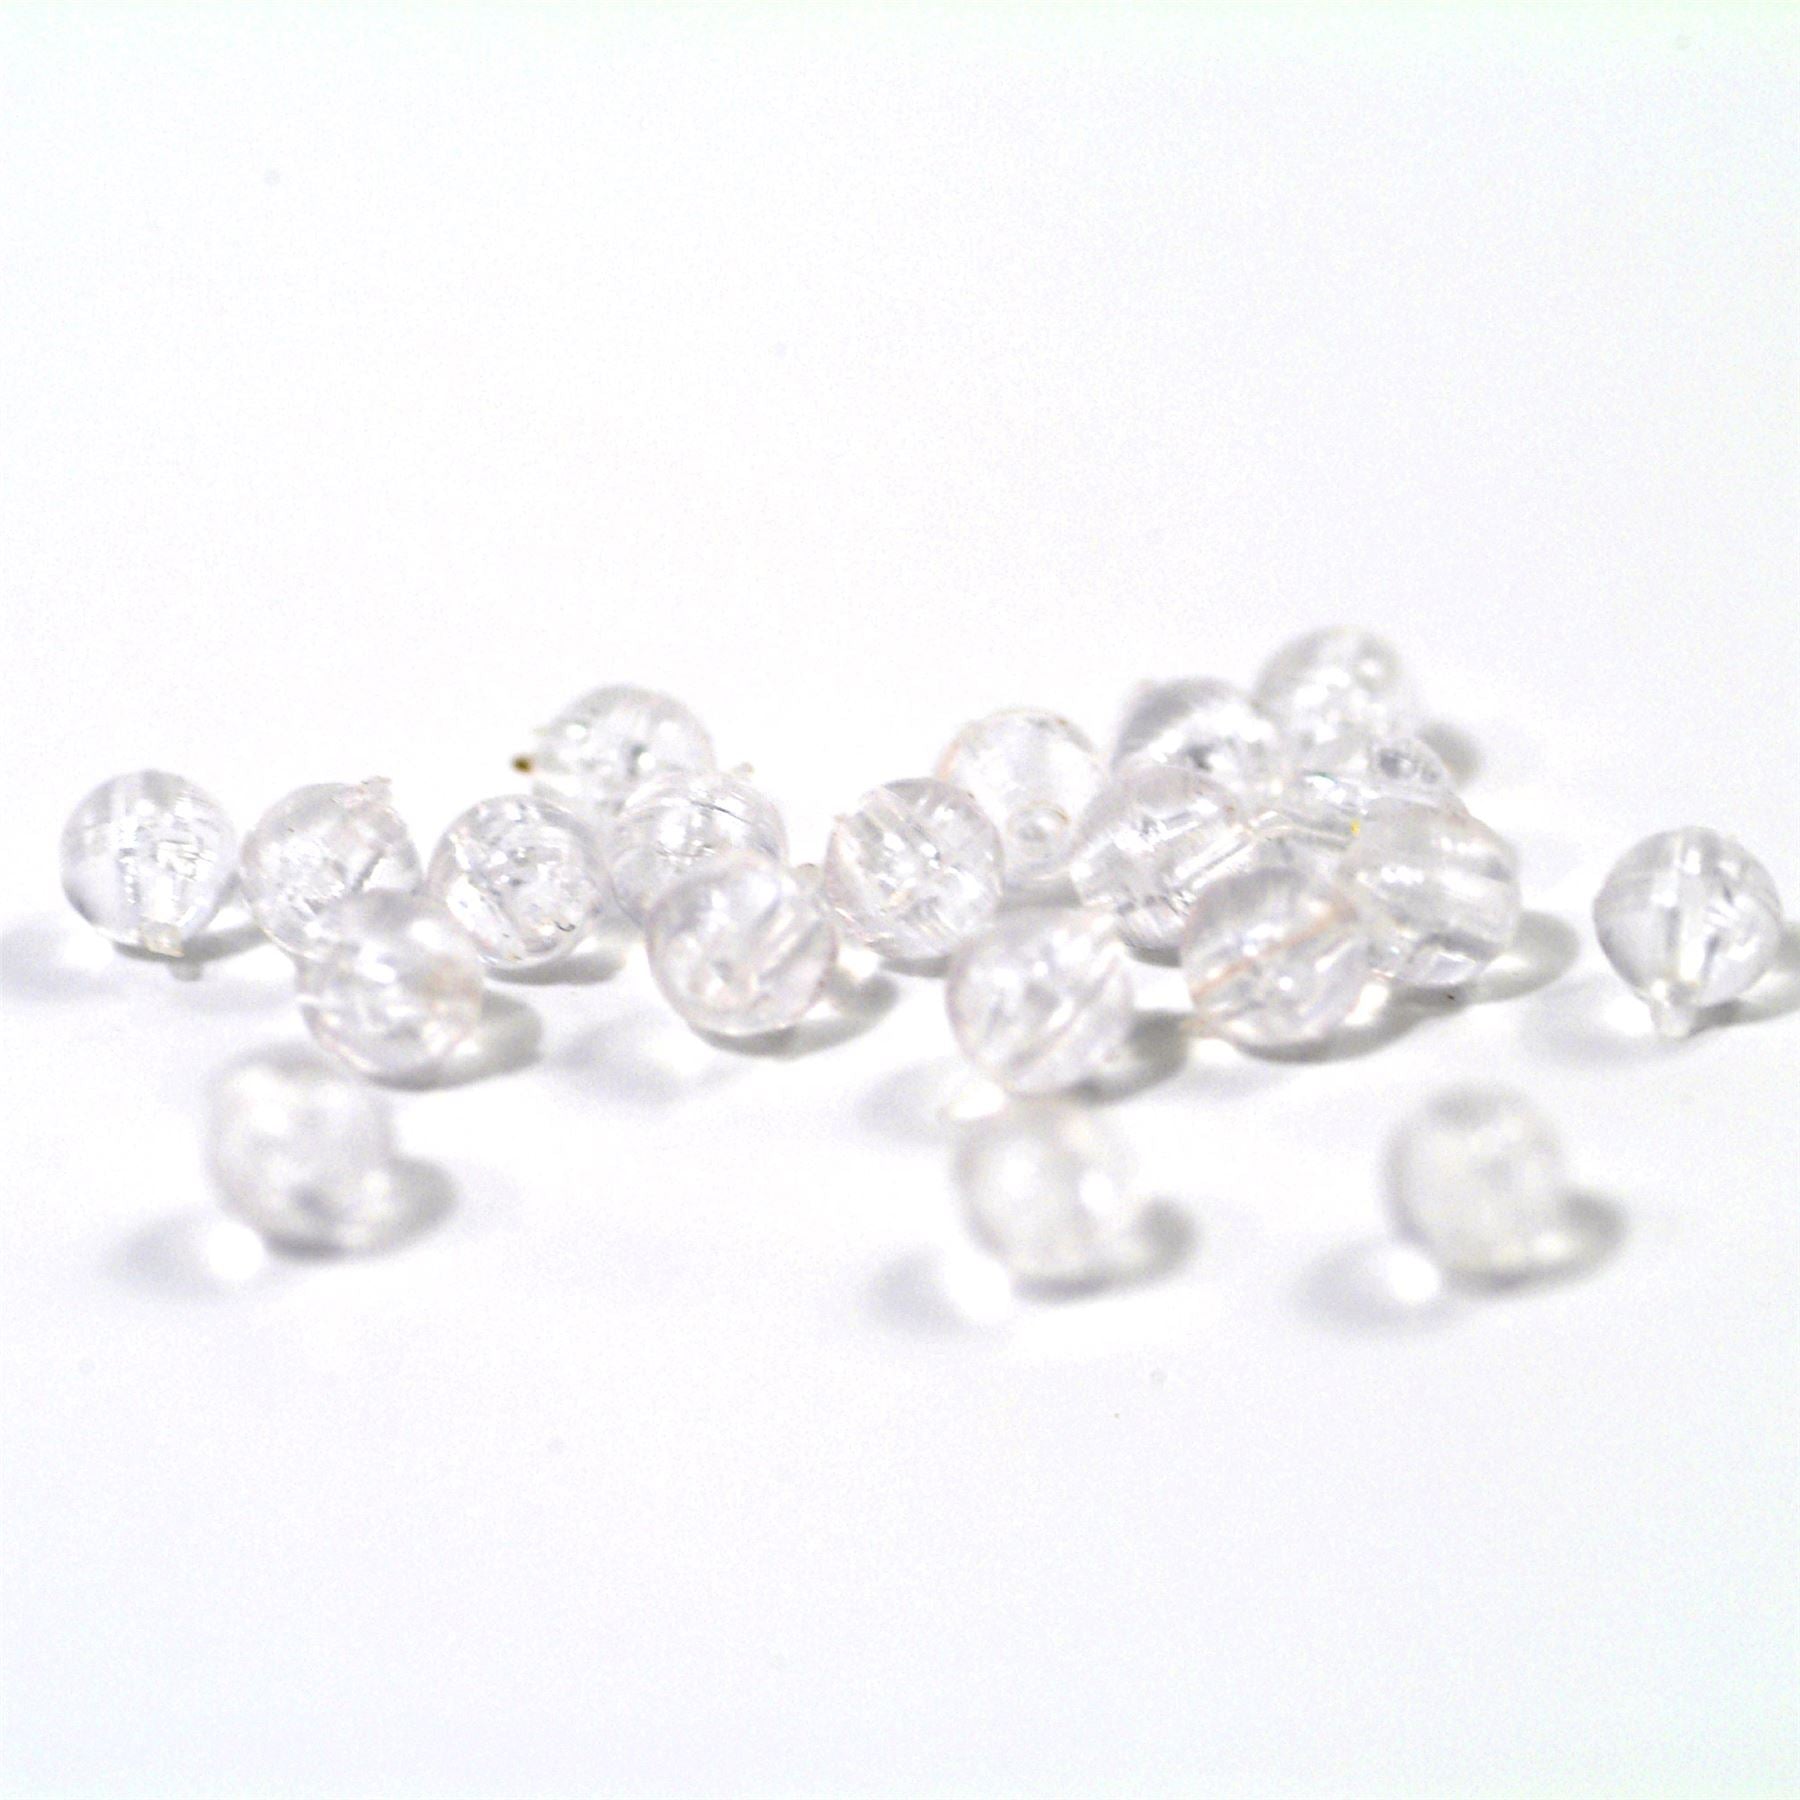 TronixPro Round Beads Clear 3mm